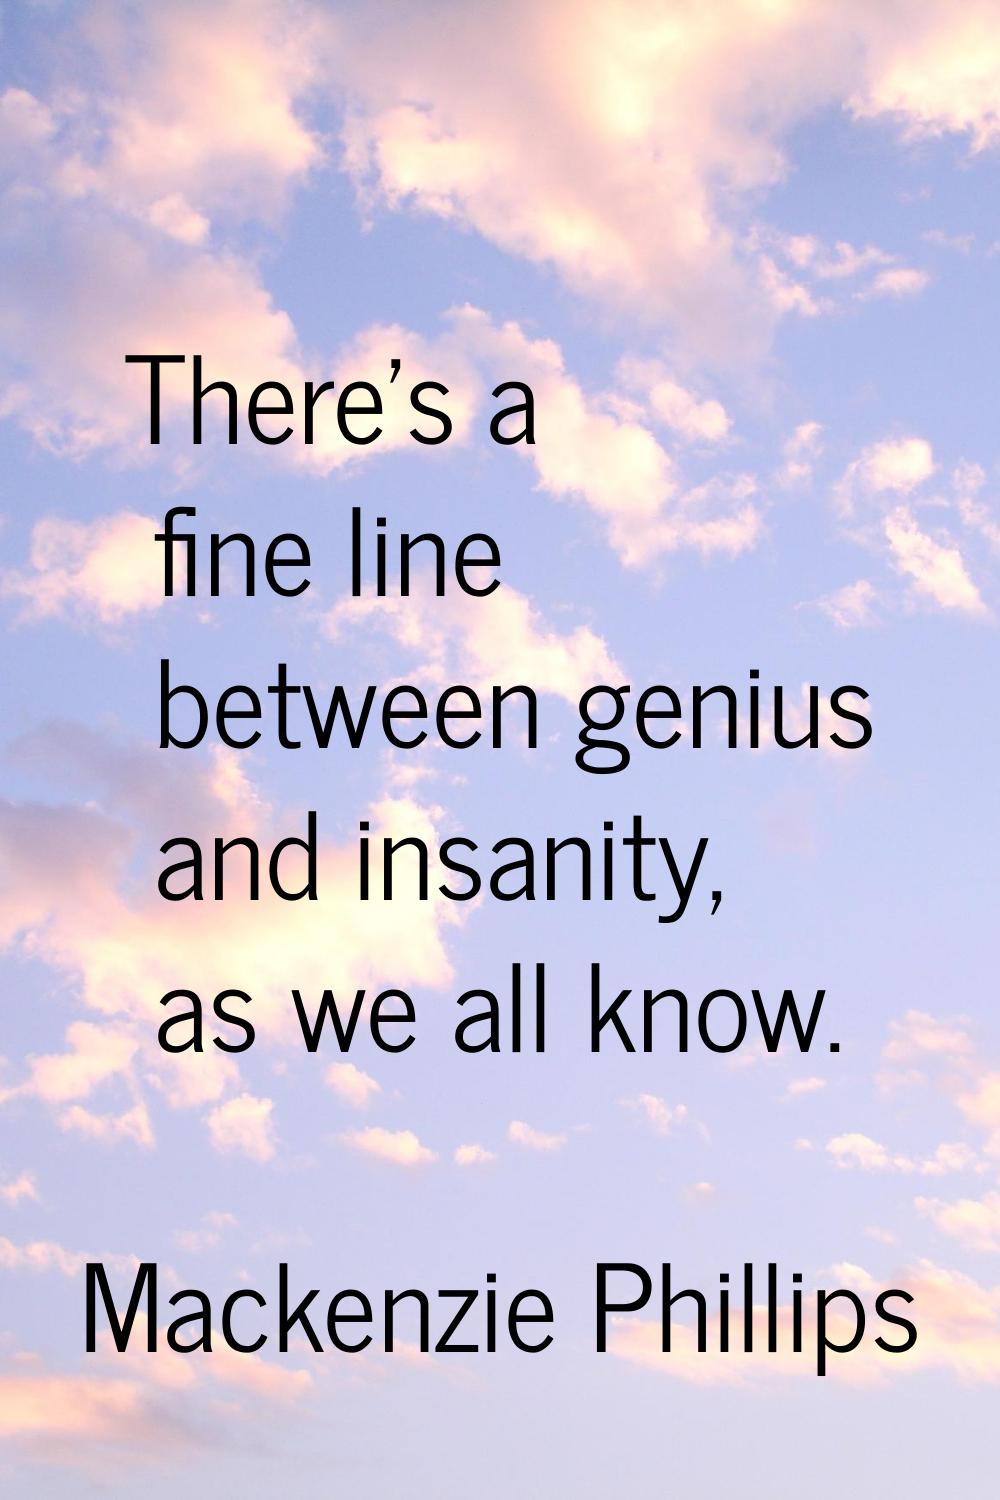 There's a fine line between genius and insanity, as we all know.